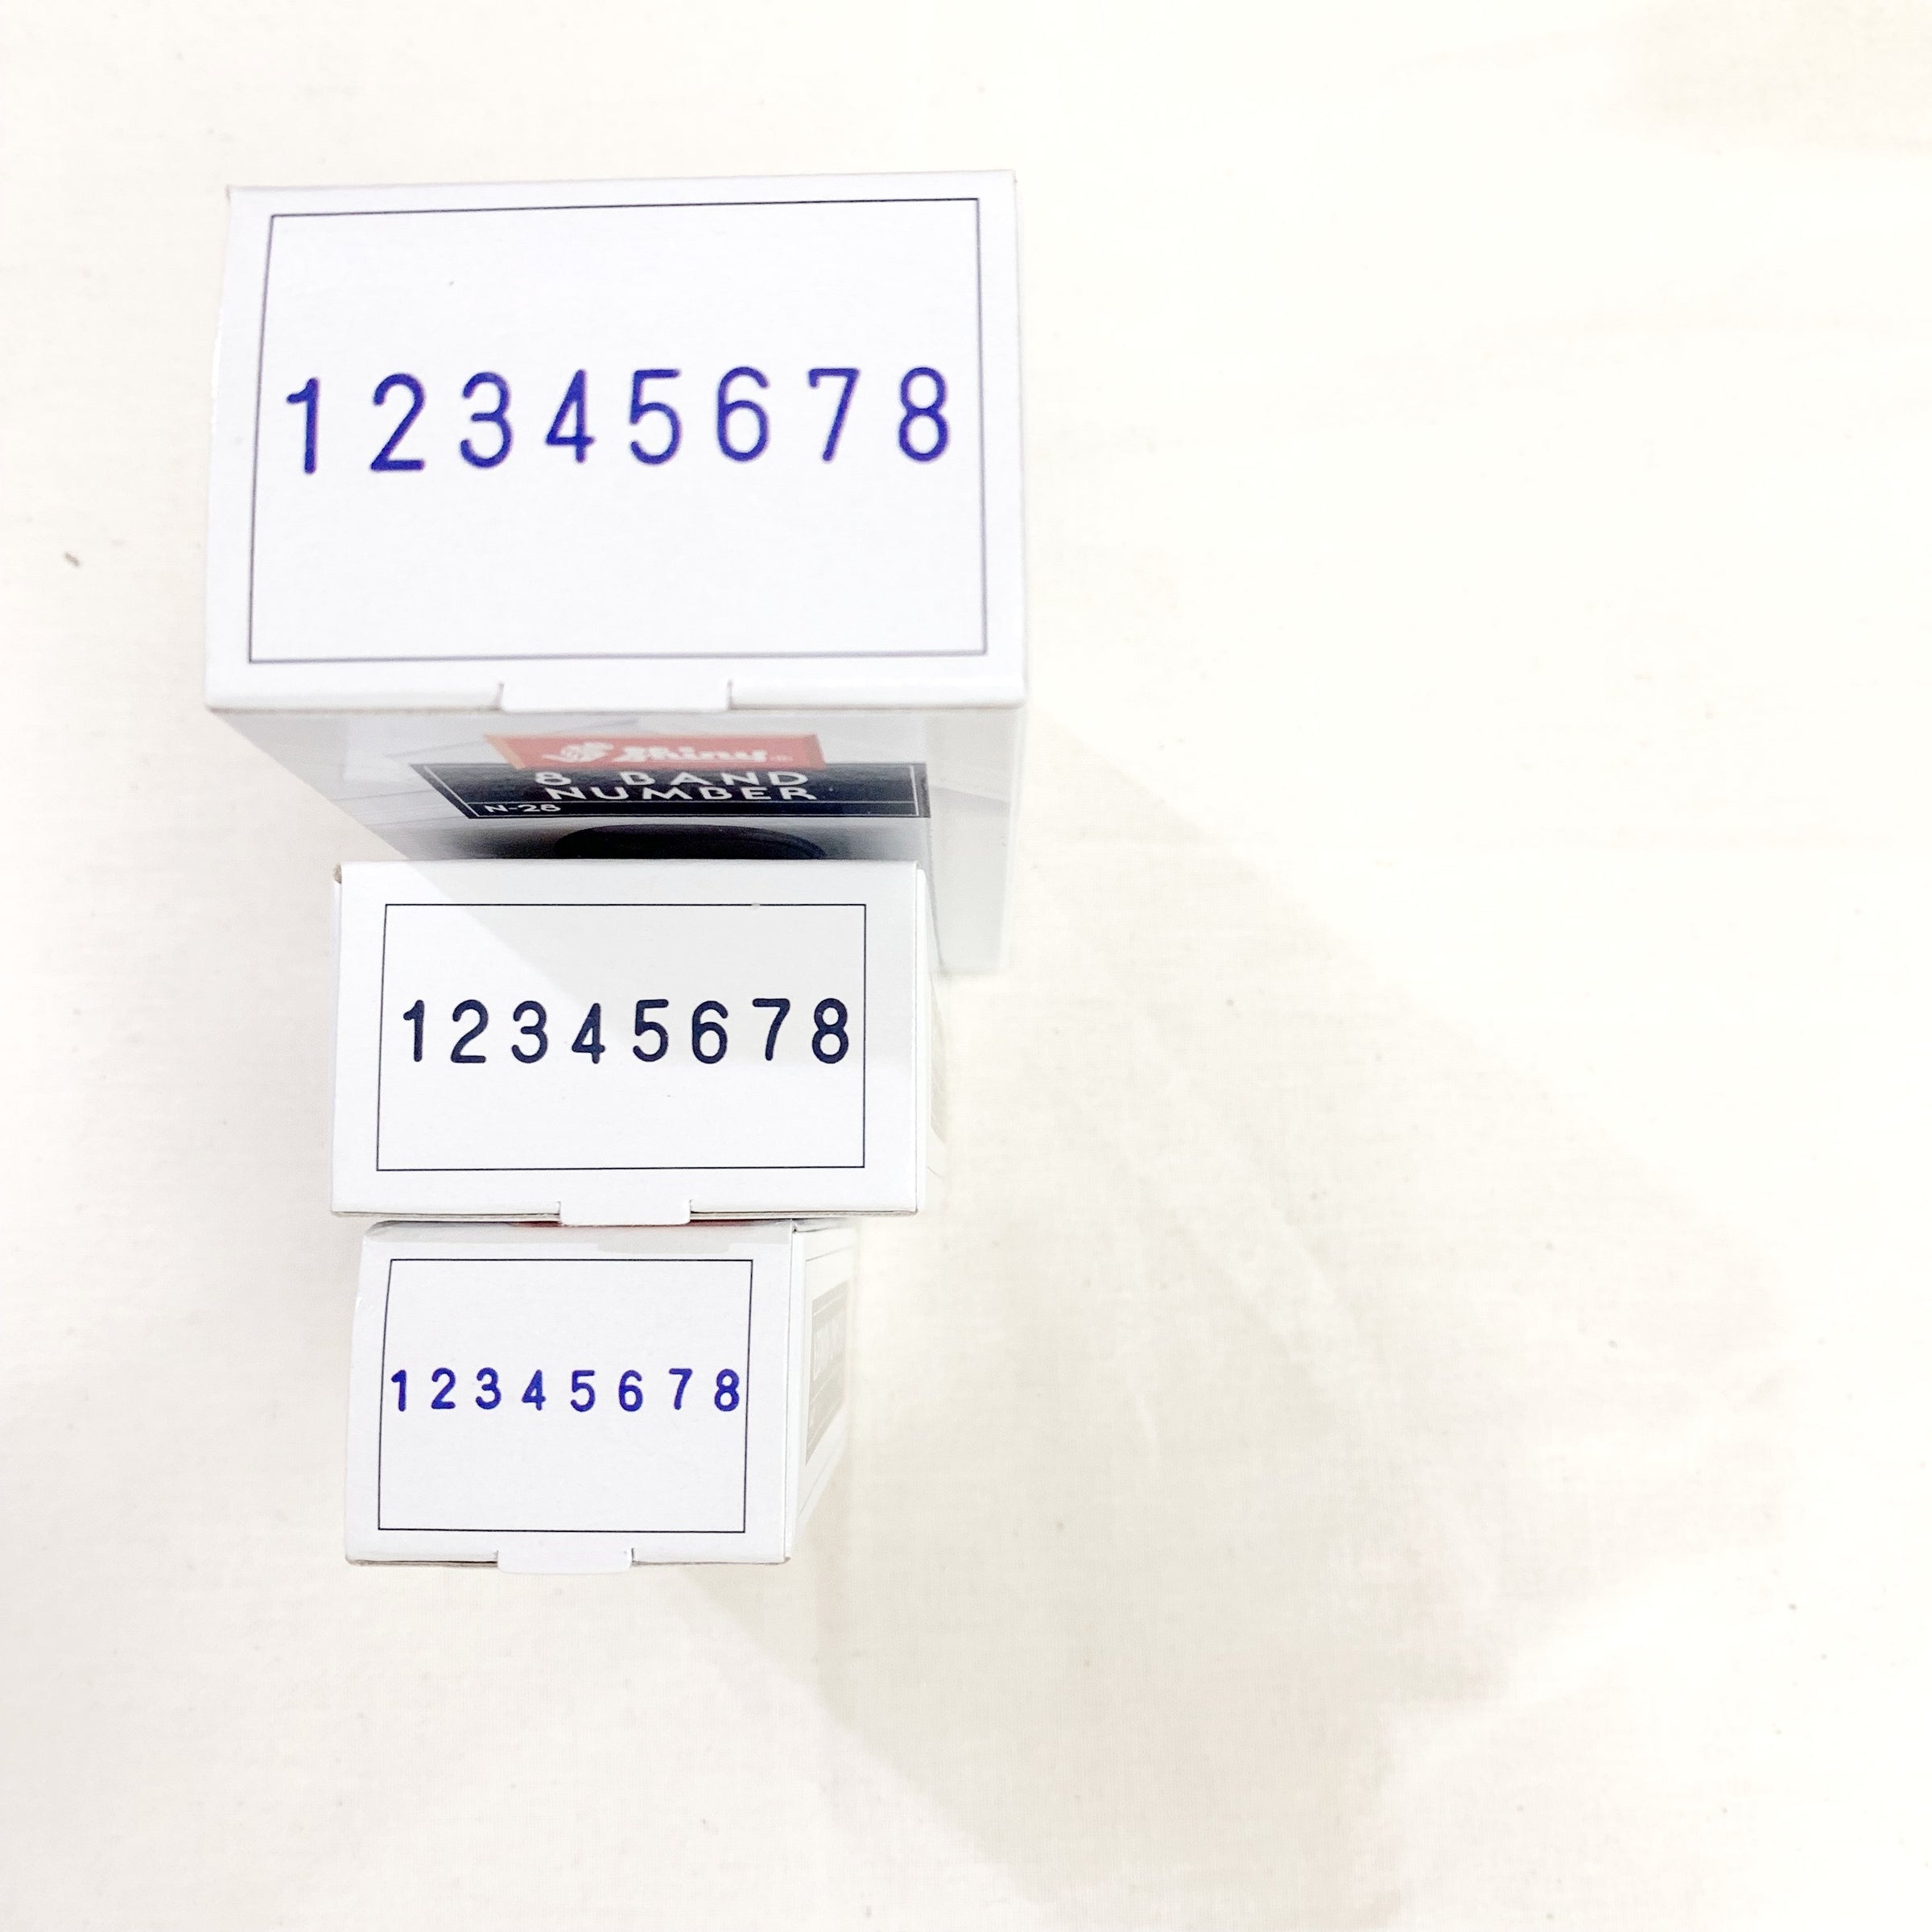 Shiny Non-Self-Inking Number Stamp Size 5 - 8 Bands